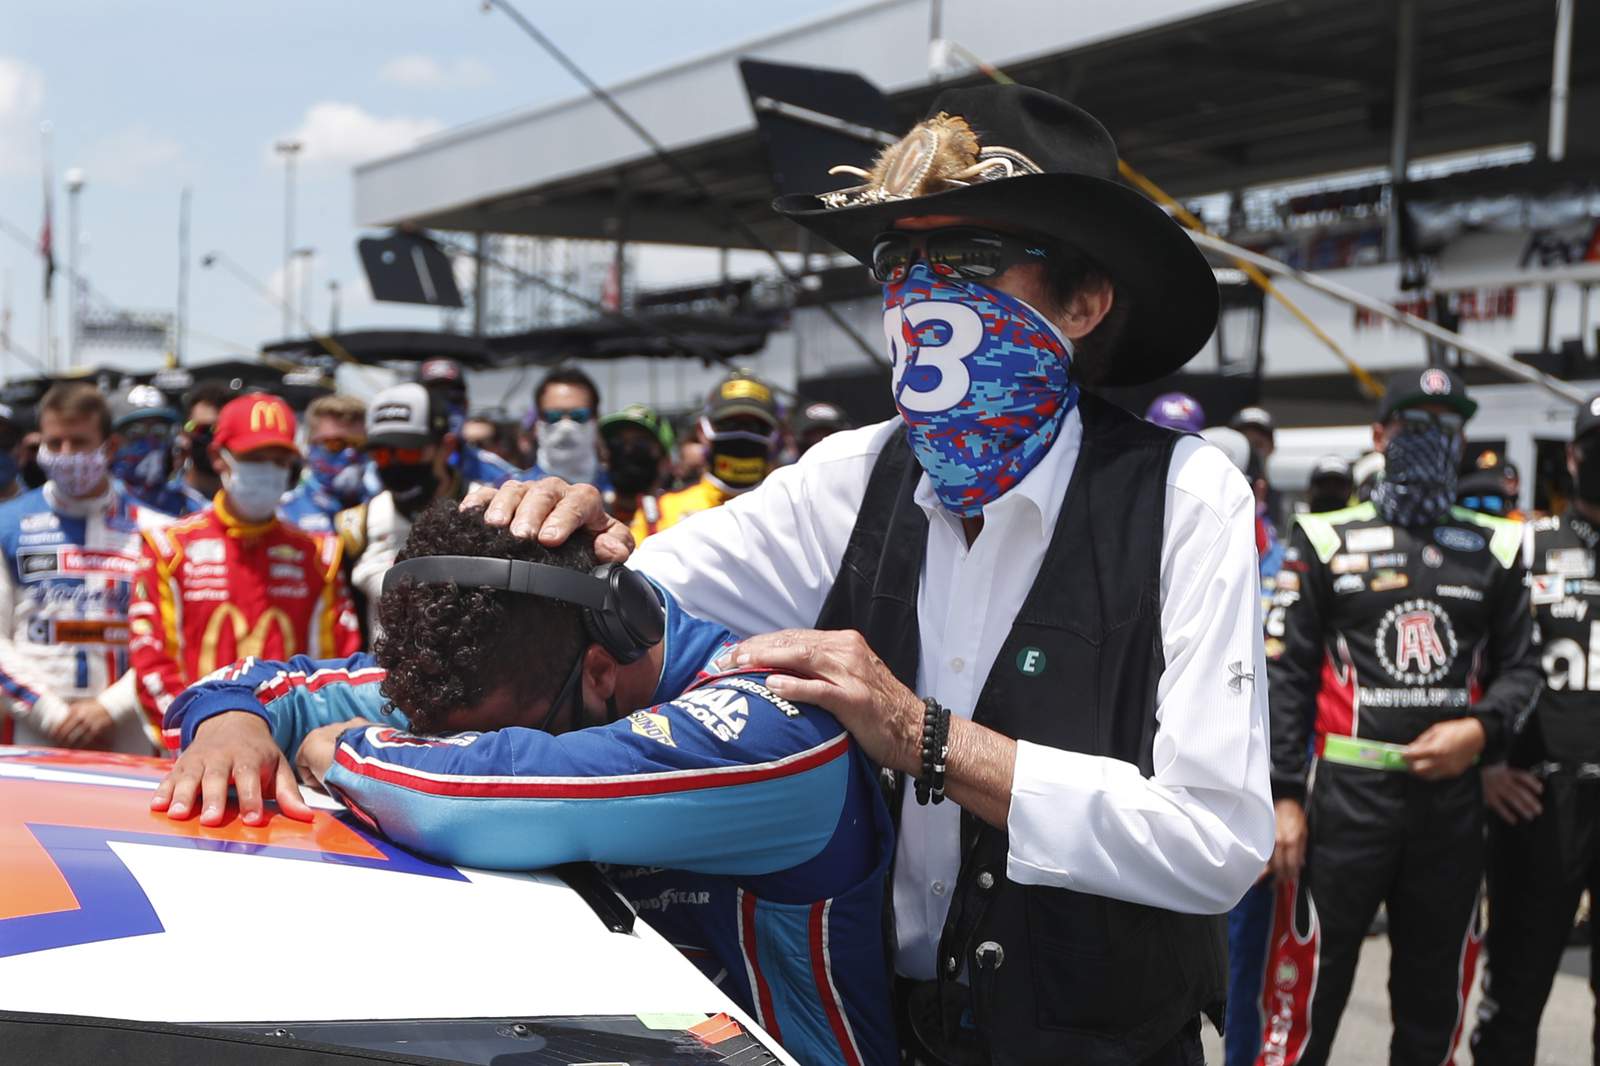 'The noose was real' - NASCAR releases photo from Talladega